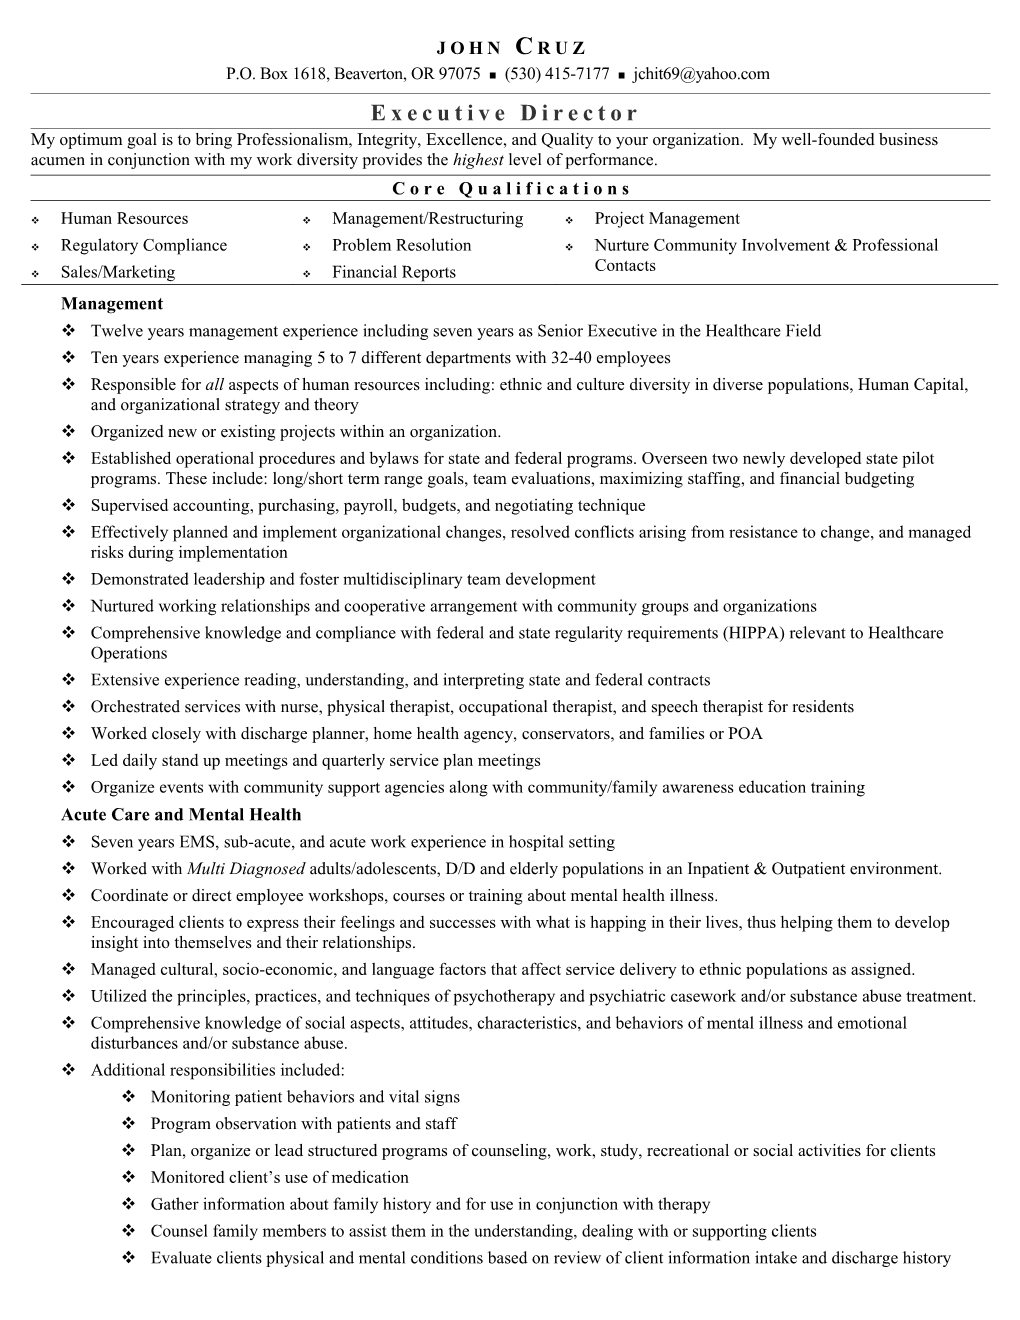 Sample Resume for a Line Worker